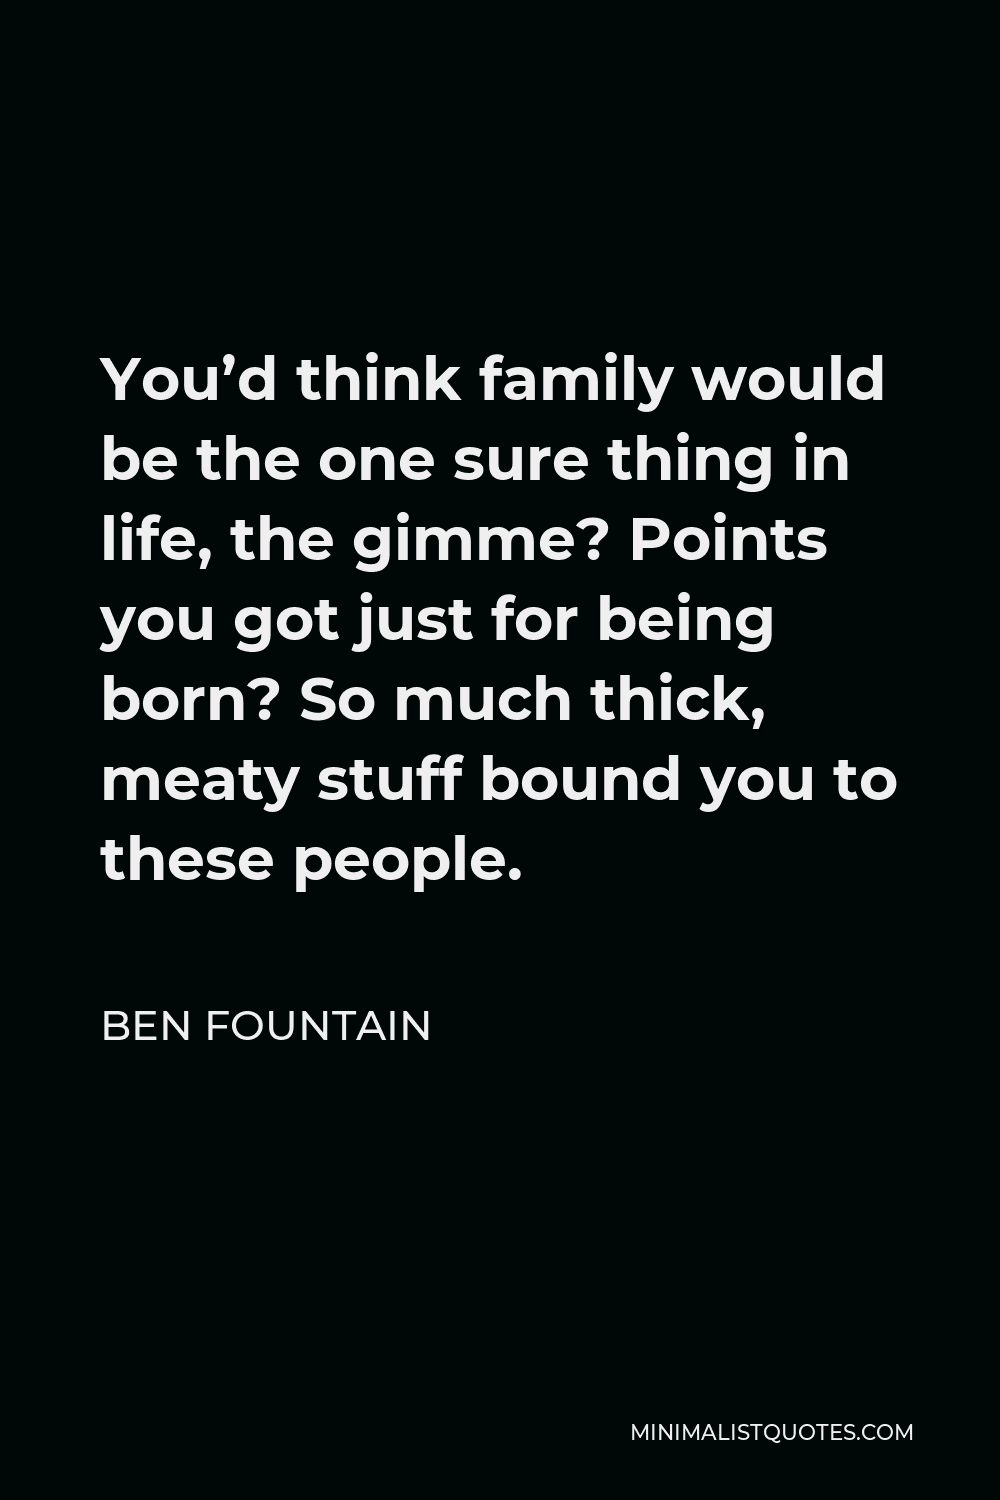 Ben Fountain Quote - You’d think family would be the one sure thing in life, the gimme? Points you got just for being born? So much thick, meaty stuff bound you to these people.